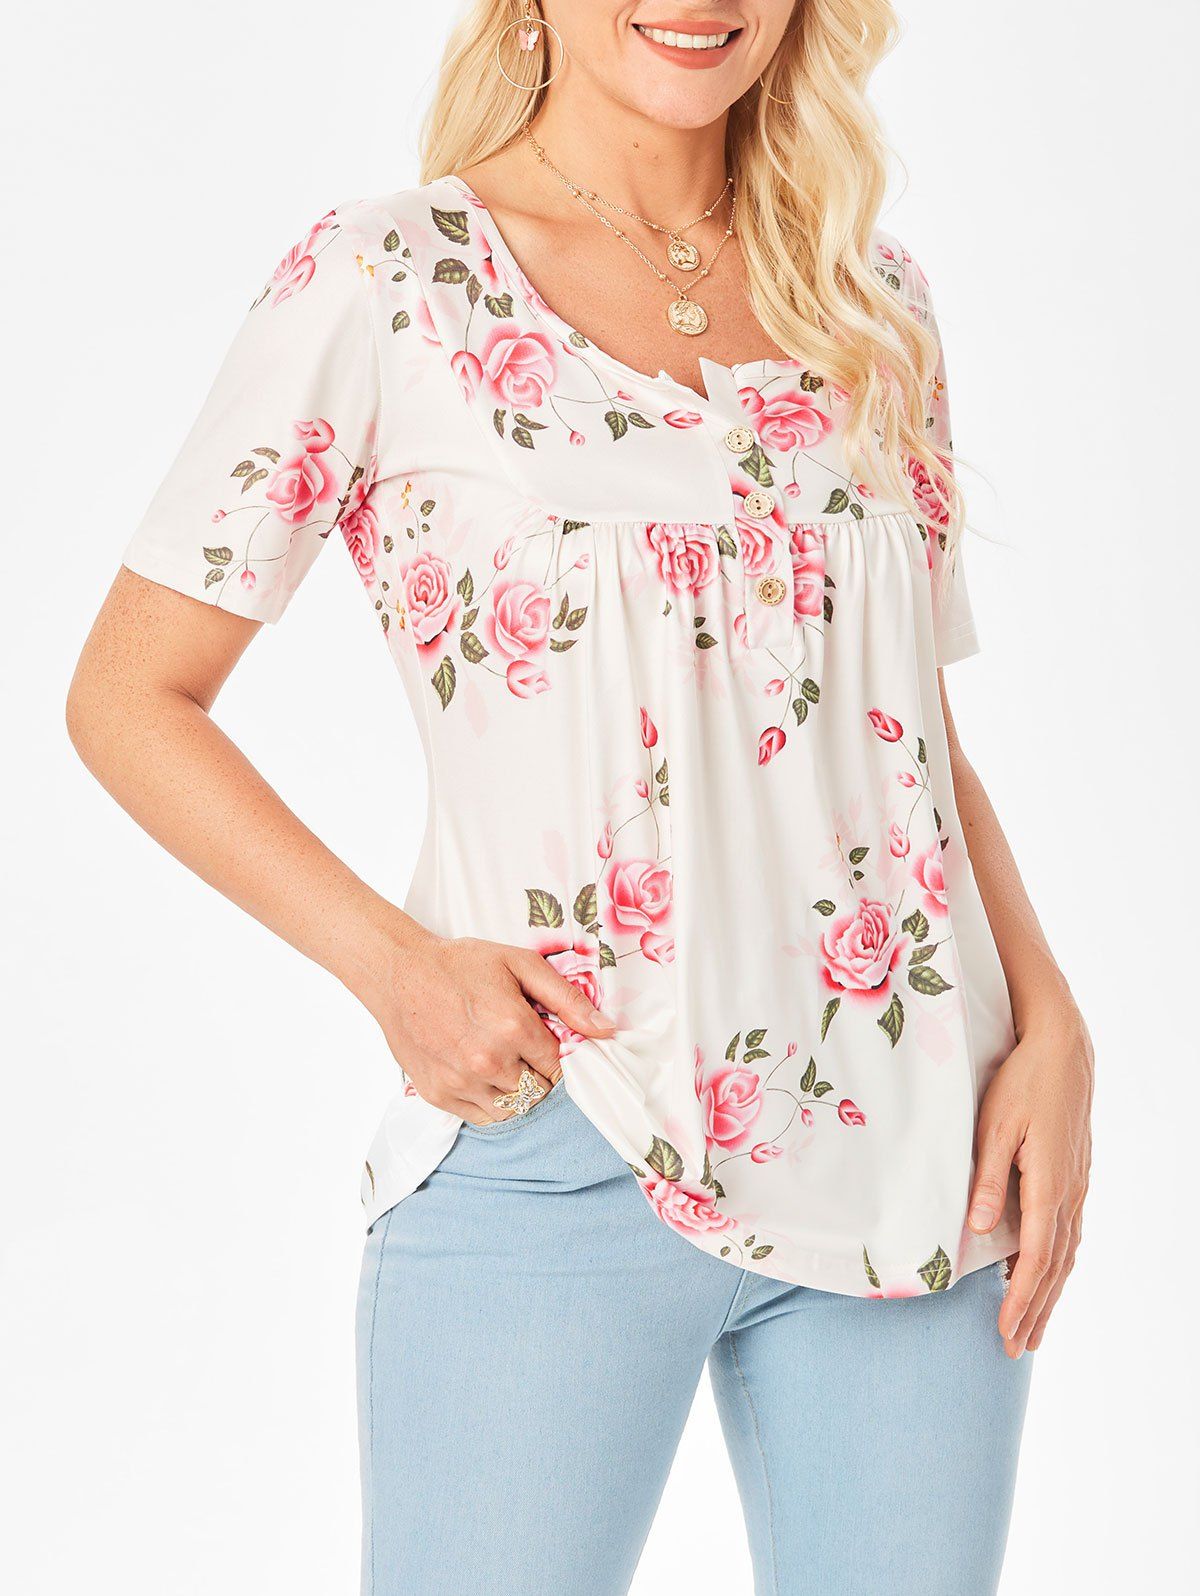 Floral Print Ruched Button Scoop Neck T Shirt - WHITE M